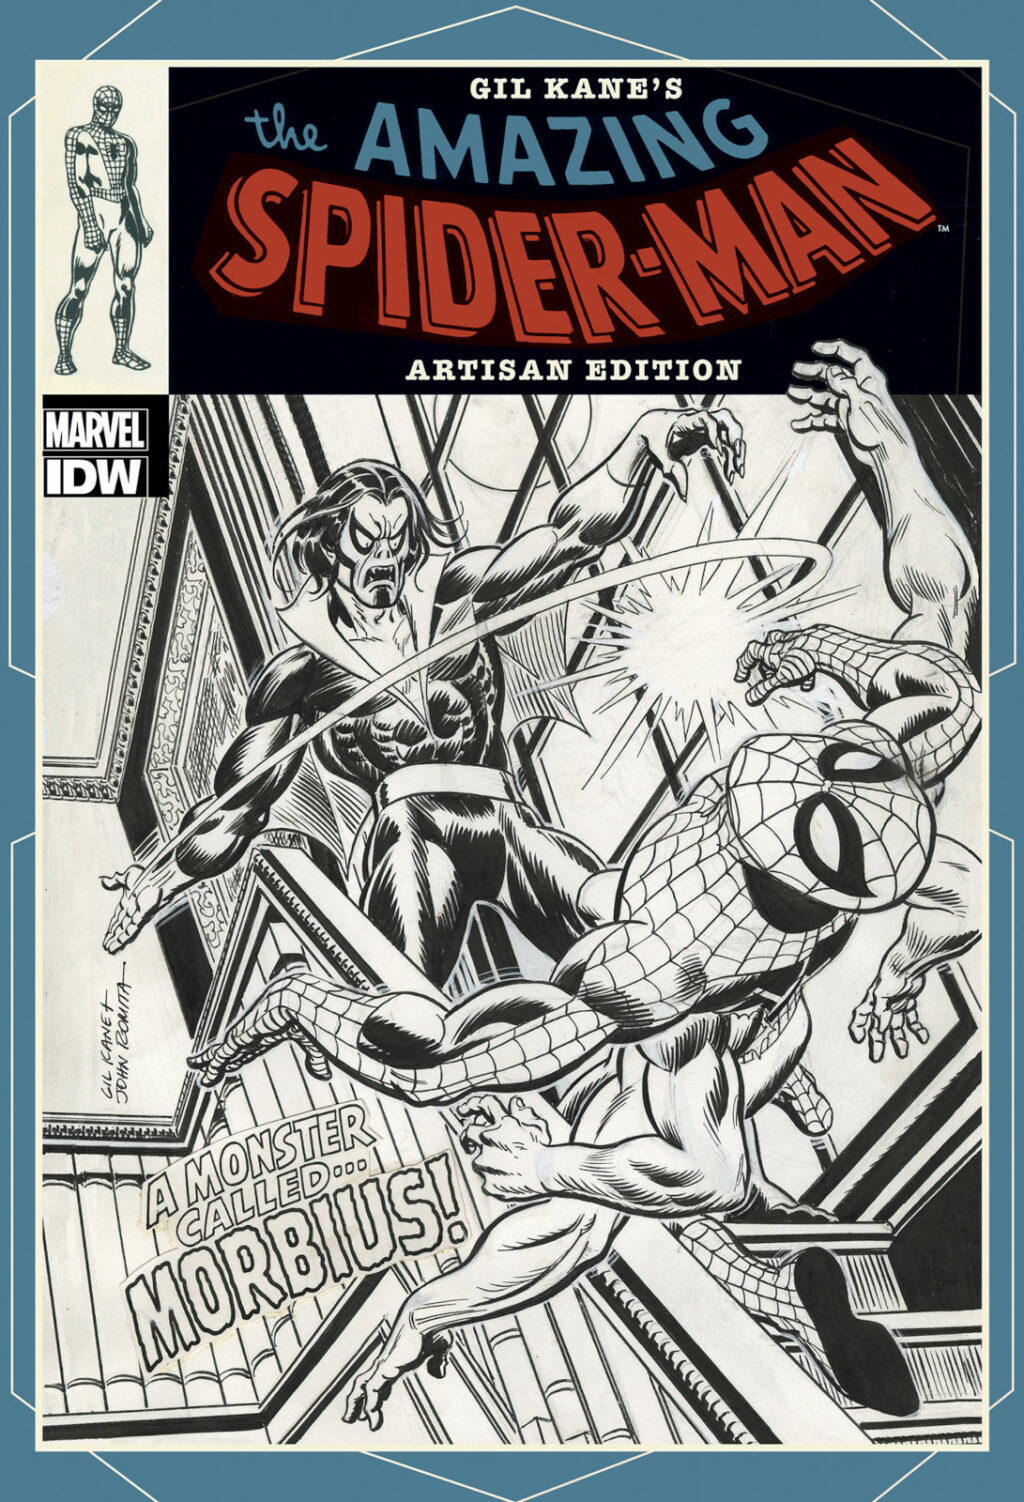 Gil Kanes The Amazing Spider Man Artisan Edition cover